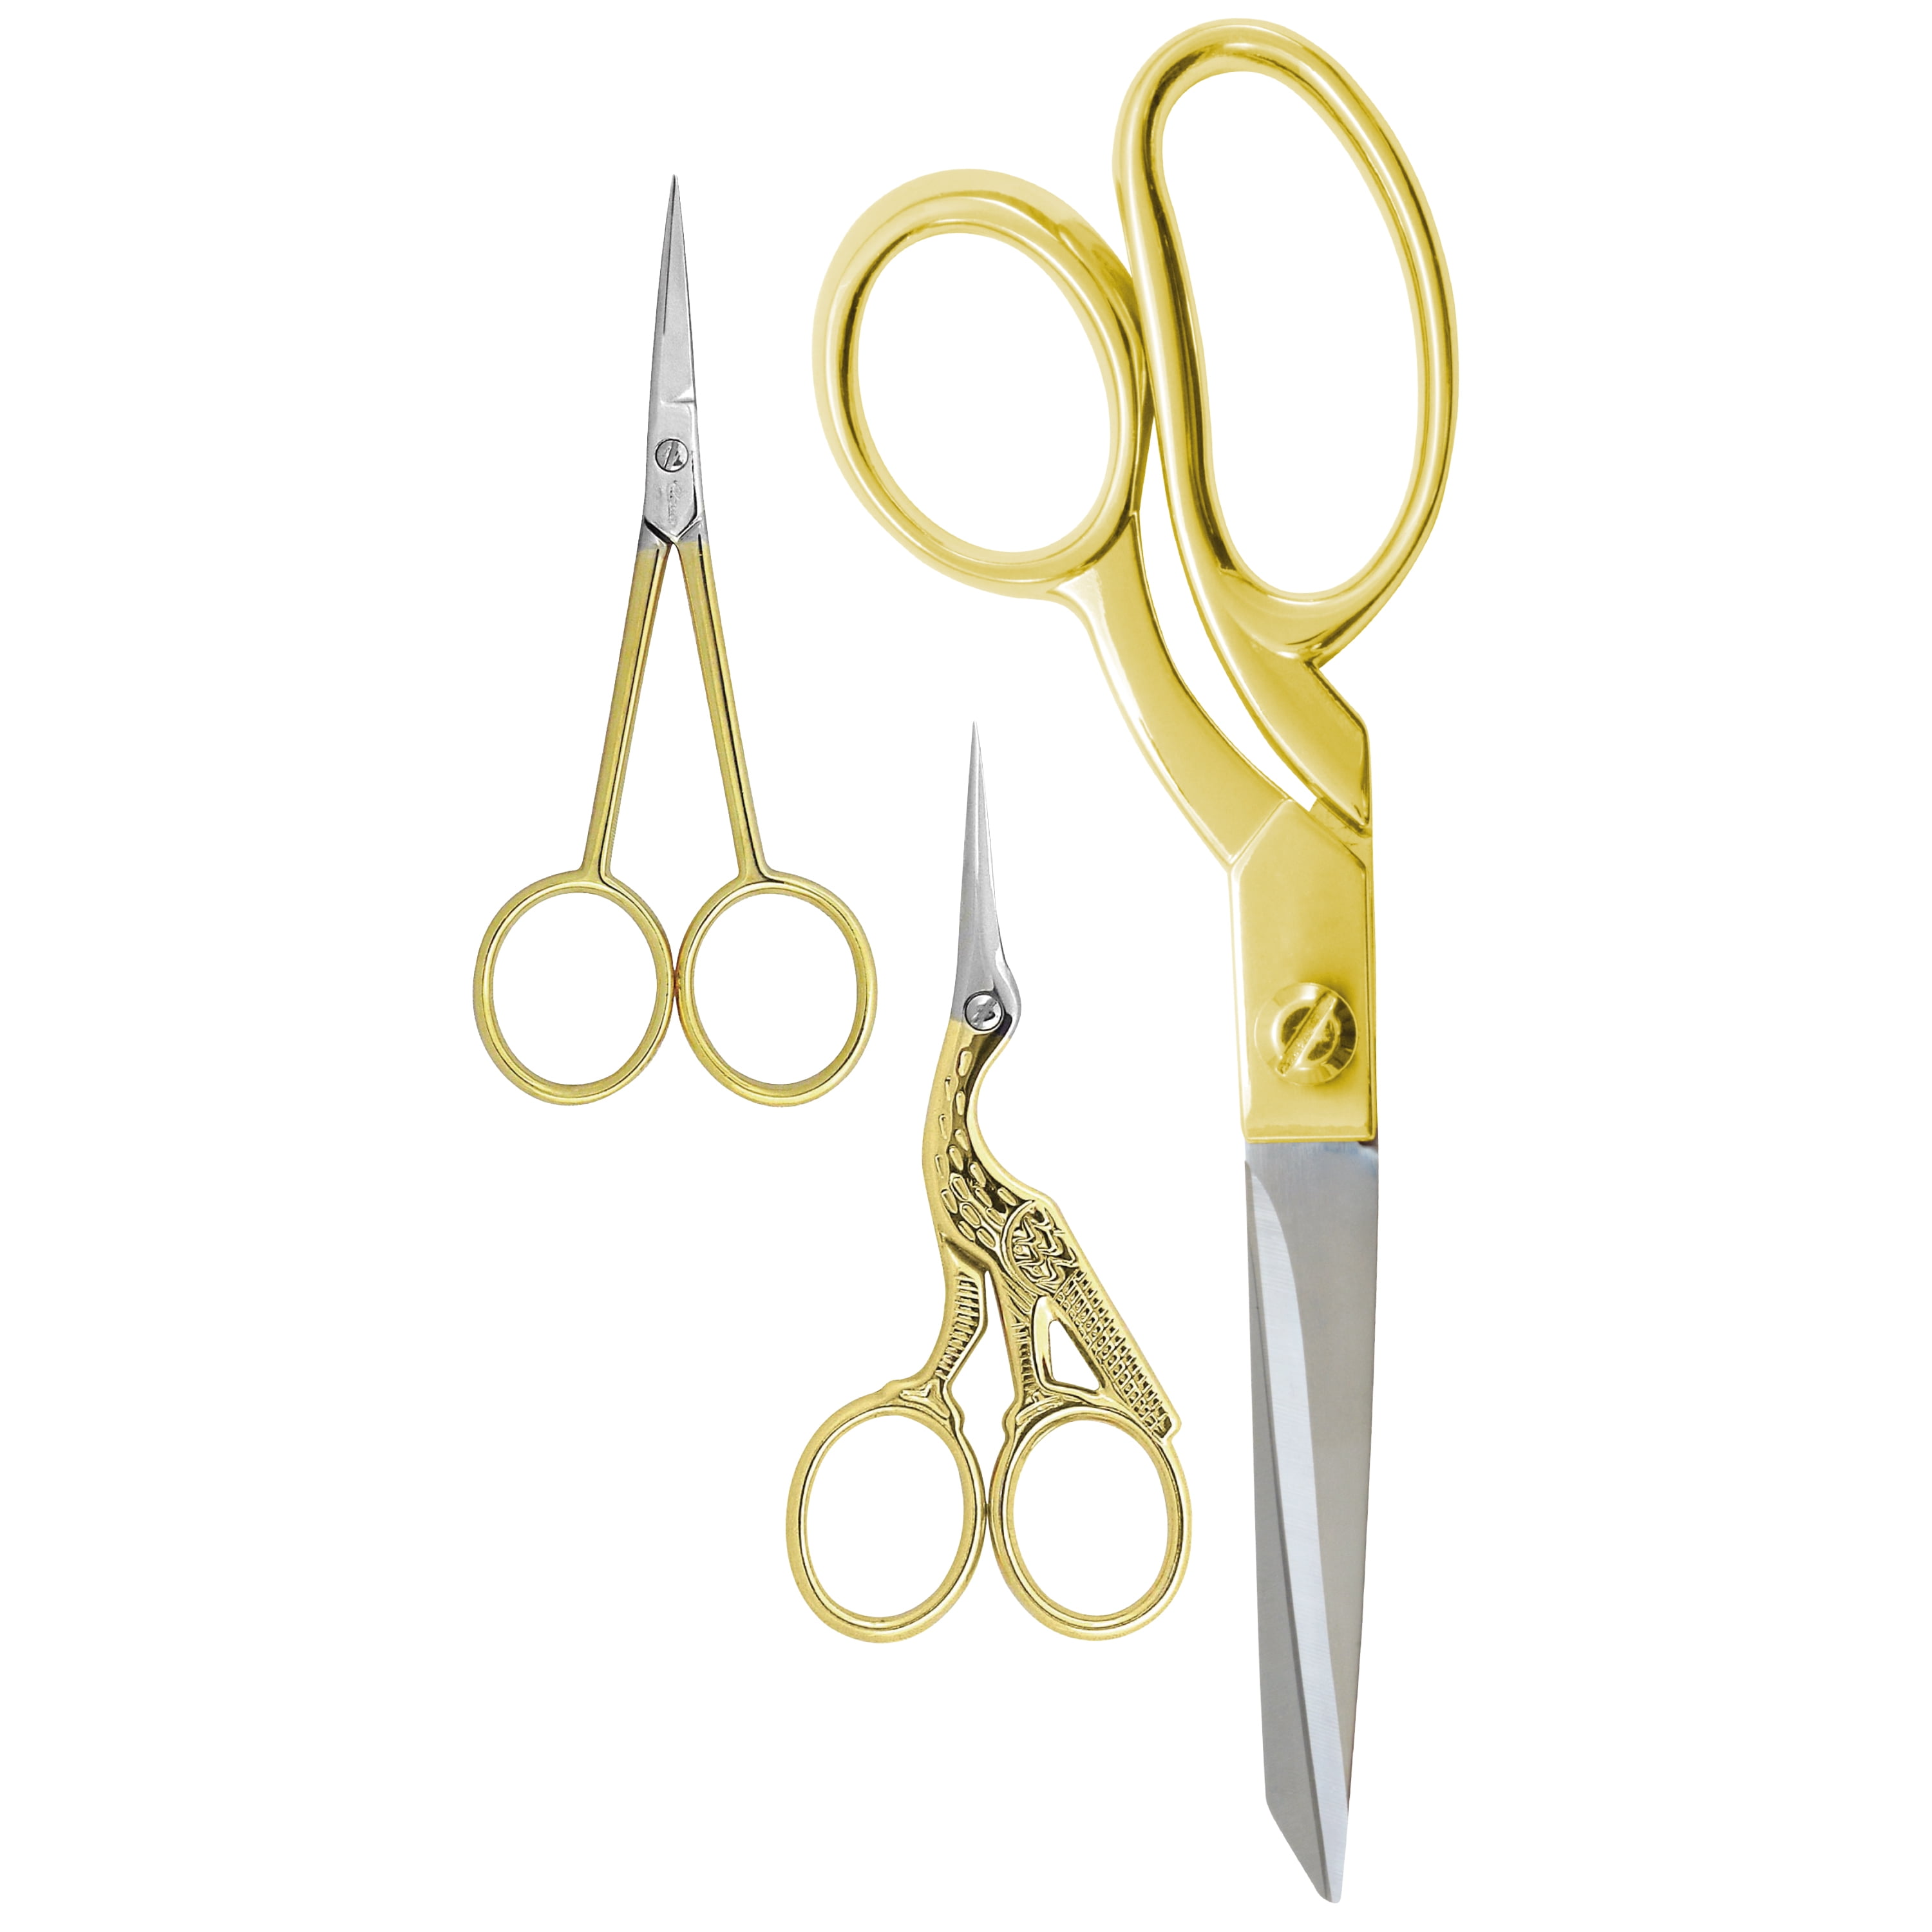 Lot Of 2 Multi Purpose Small Embroidery Fancy Scissors 3.5 Gold Plated  S.Steel